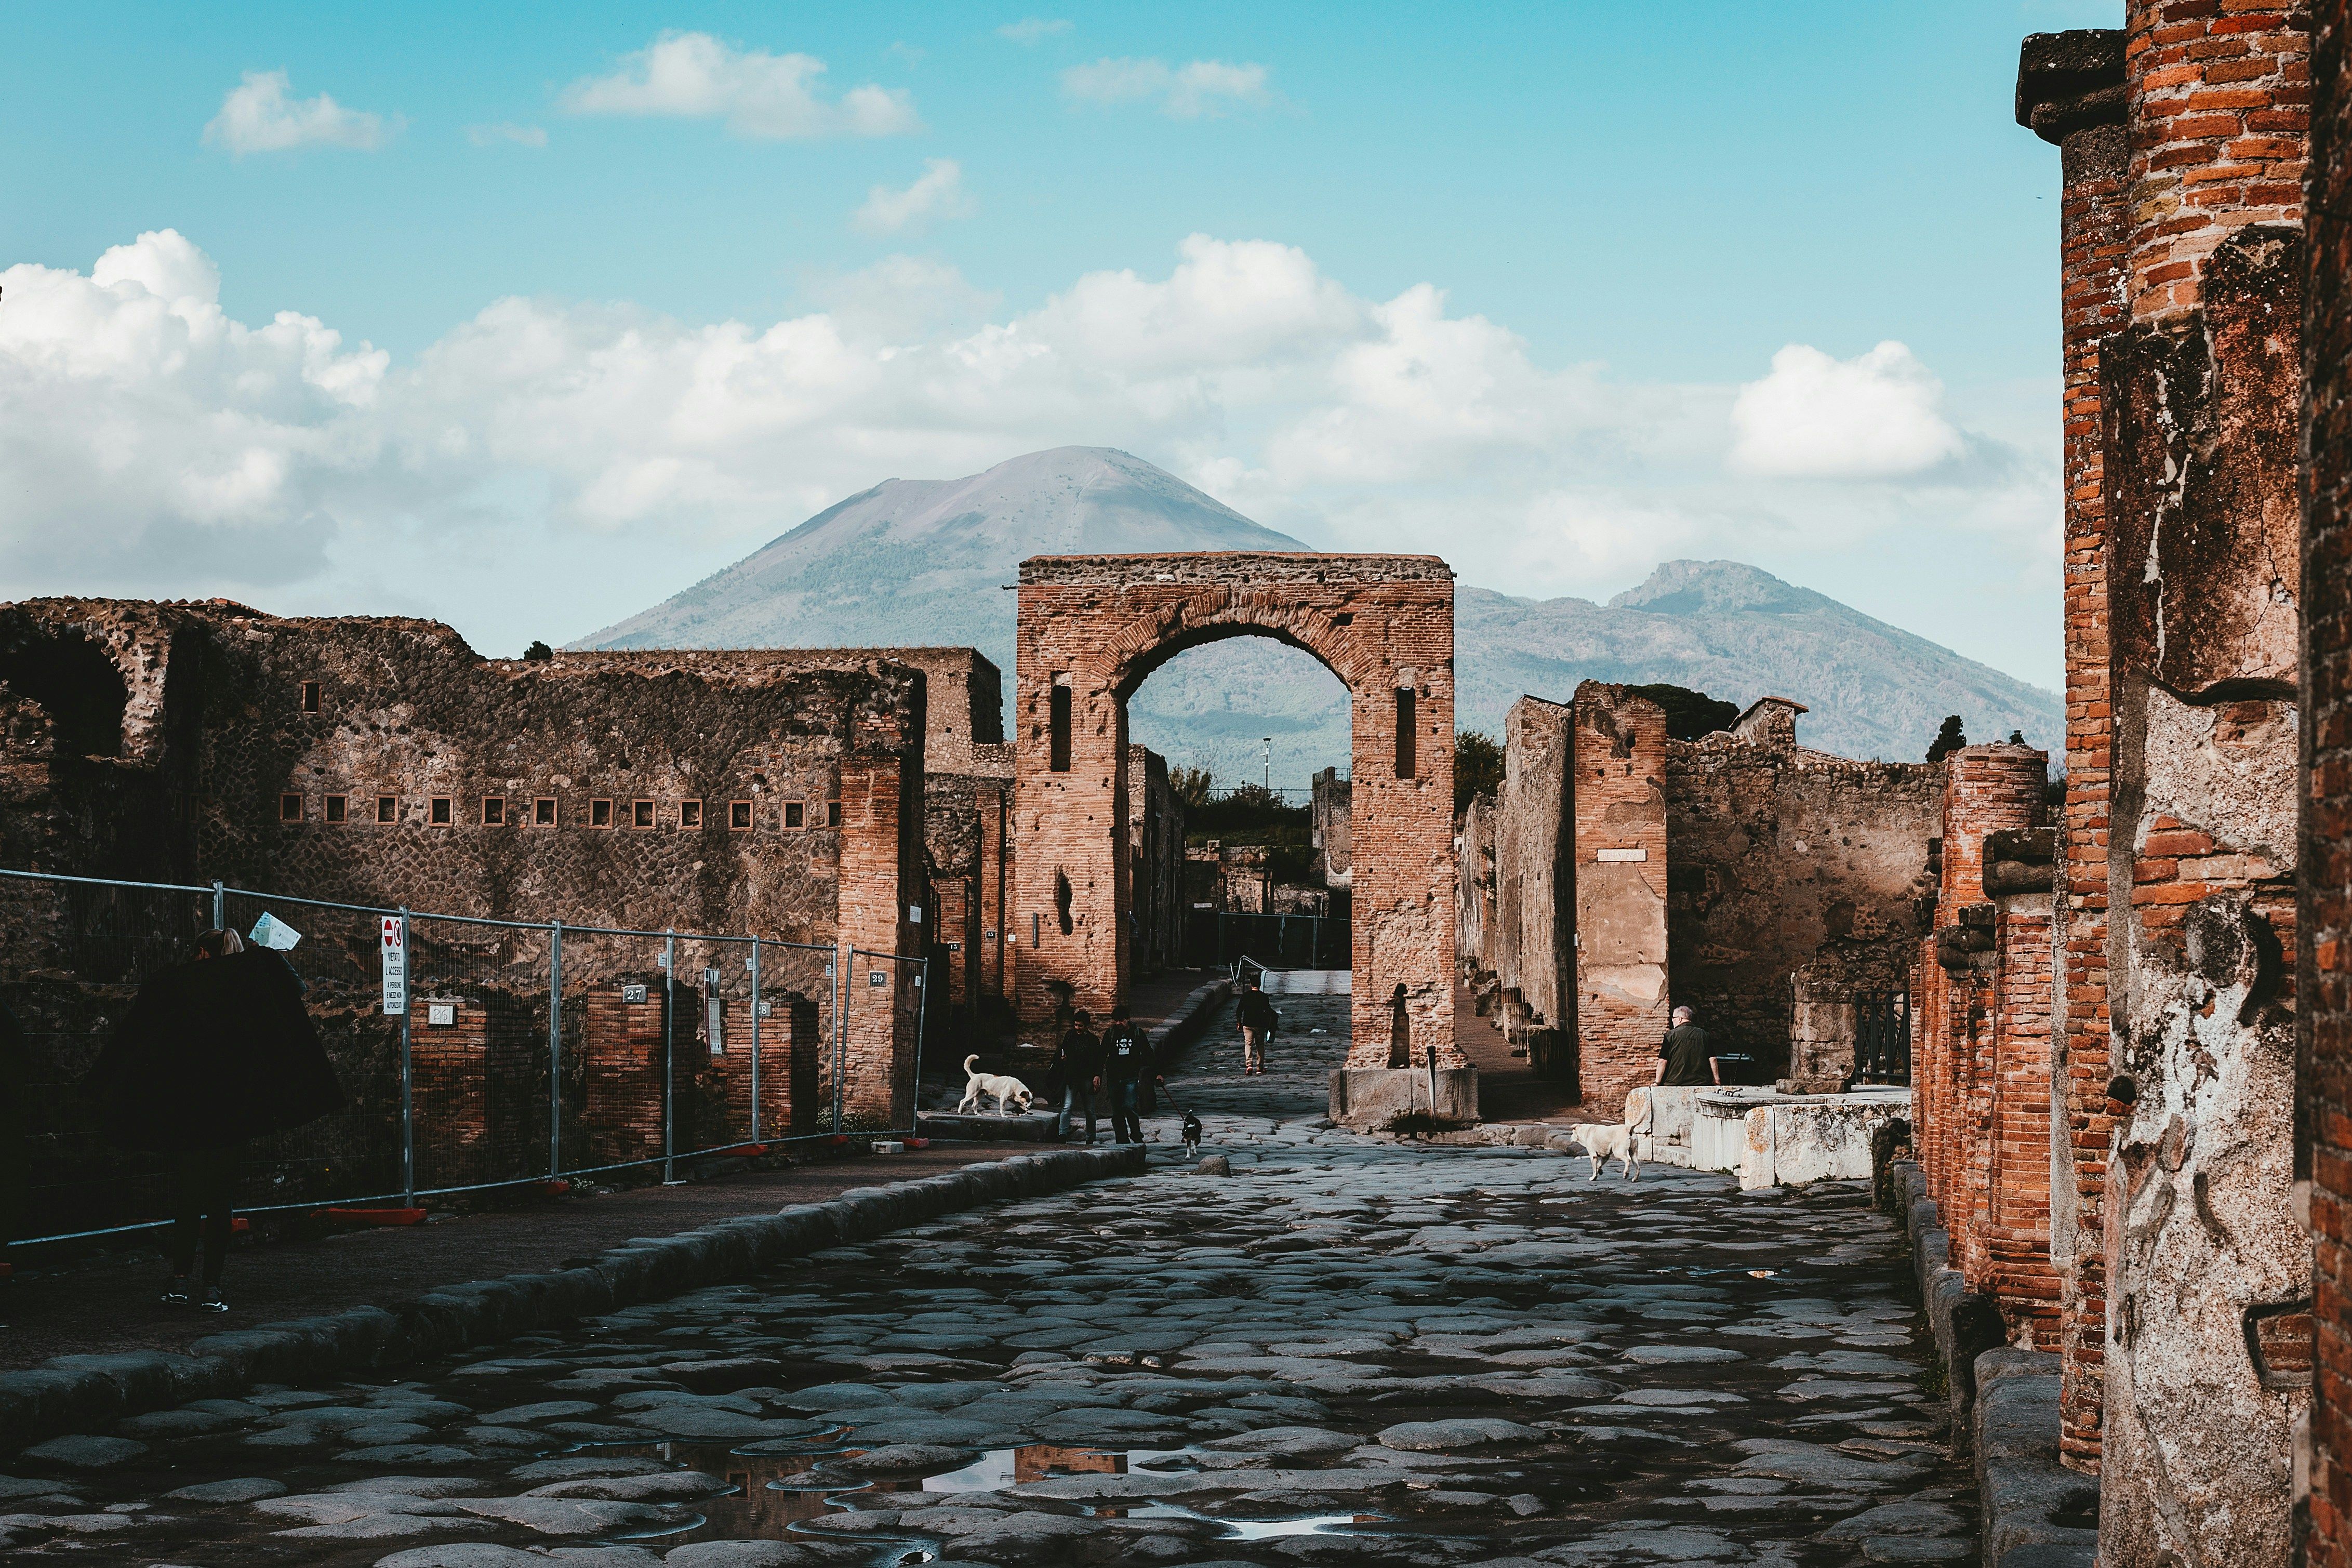 Pompeii arch at a cobble road with people walking along